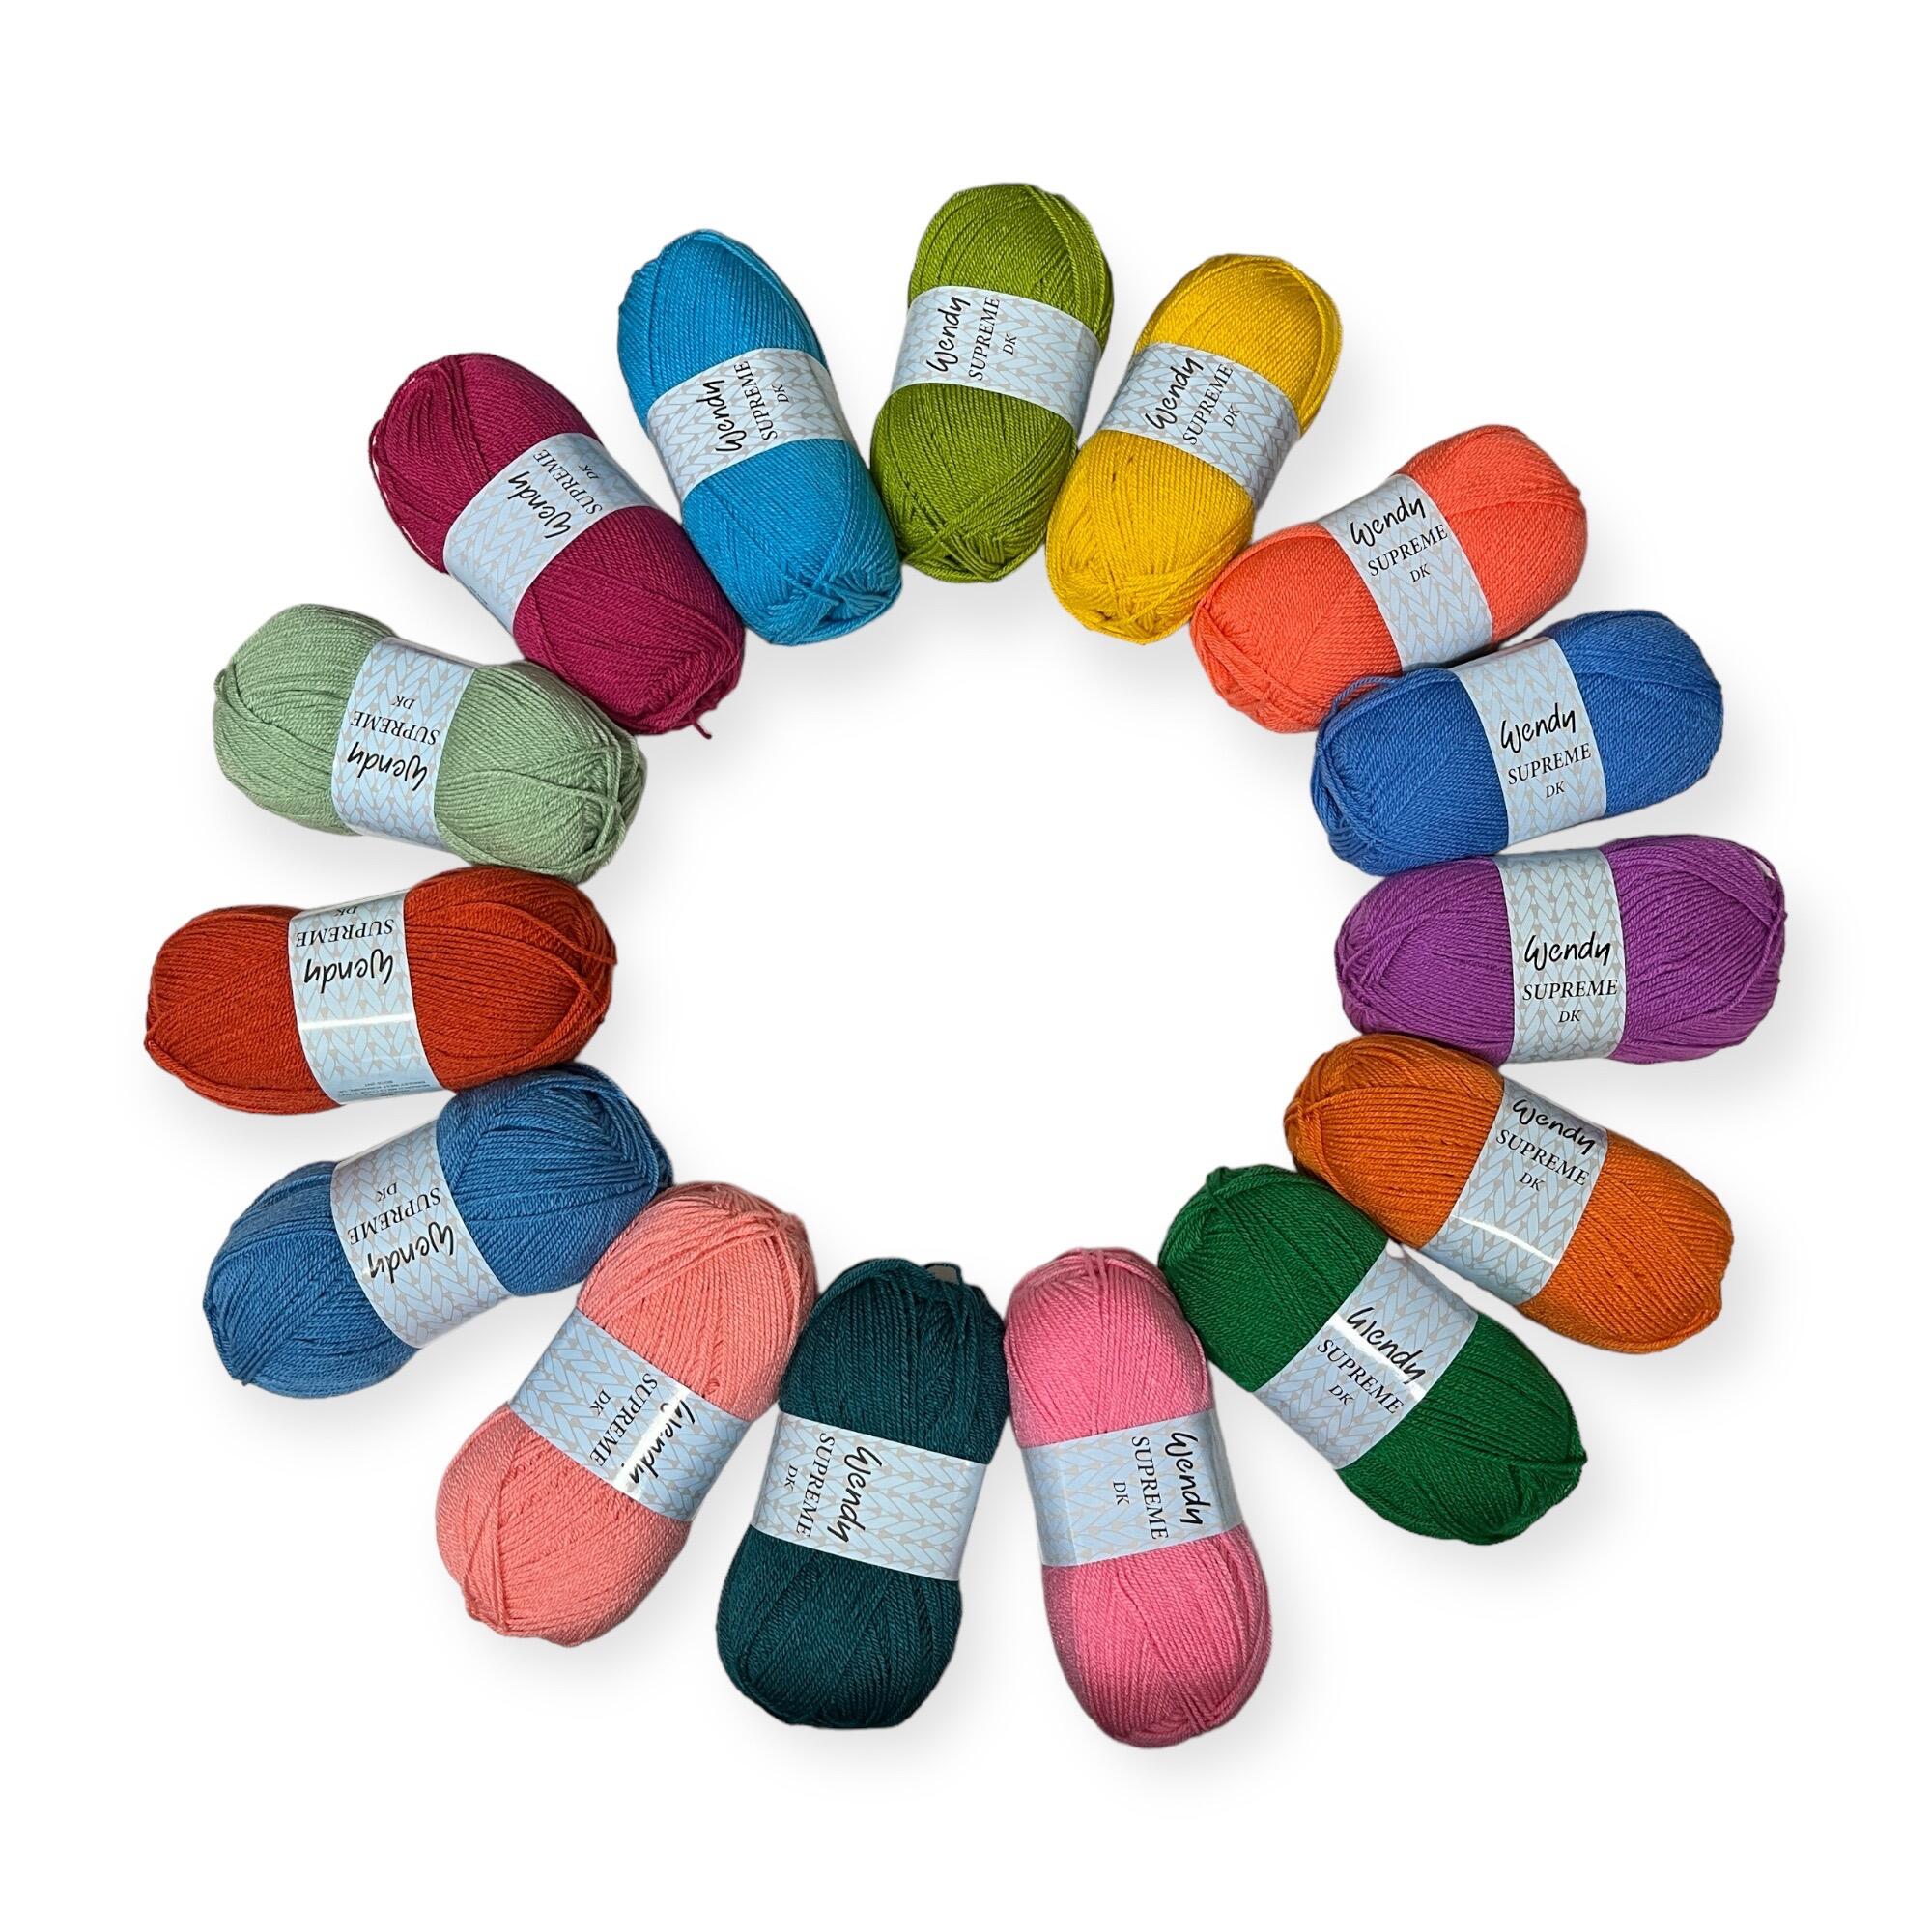 All hues of the festival of colours yarn pack presented  in a circle